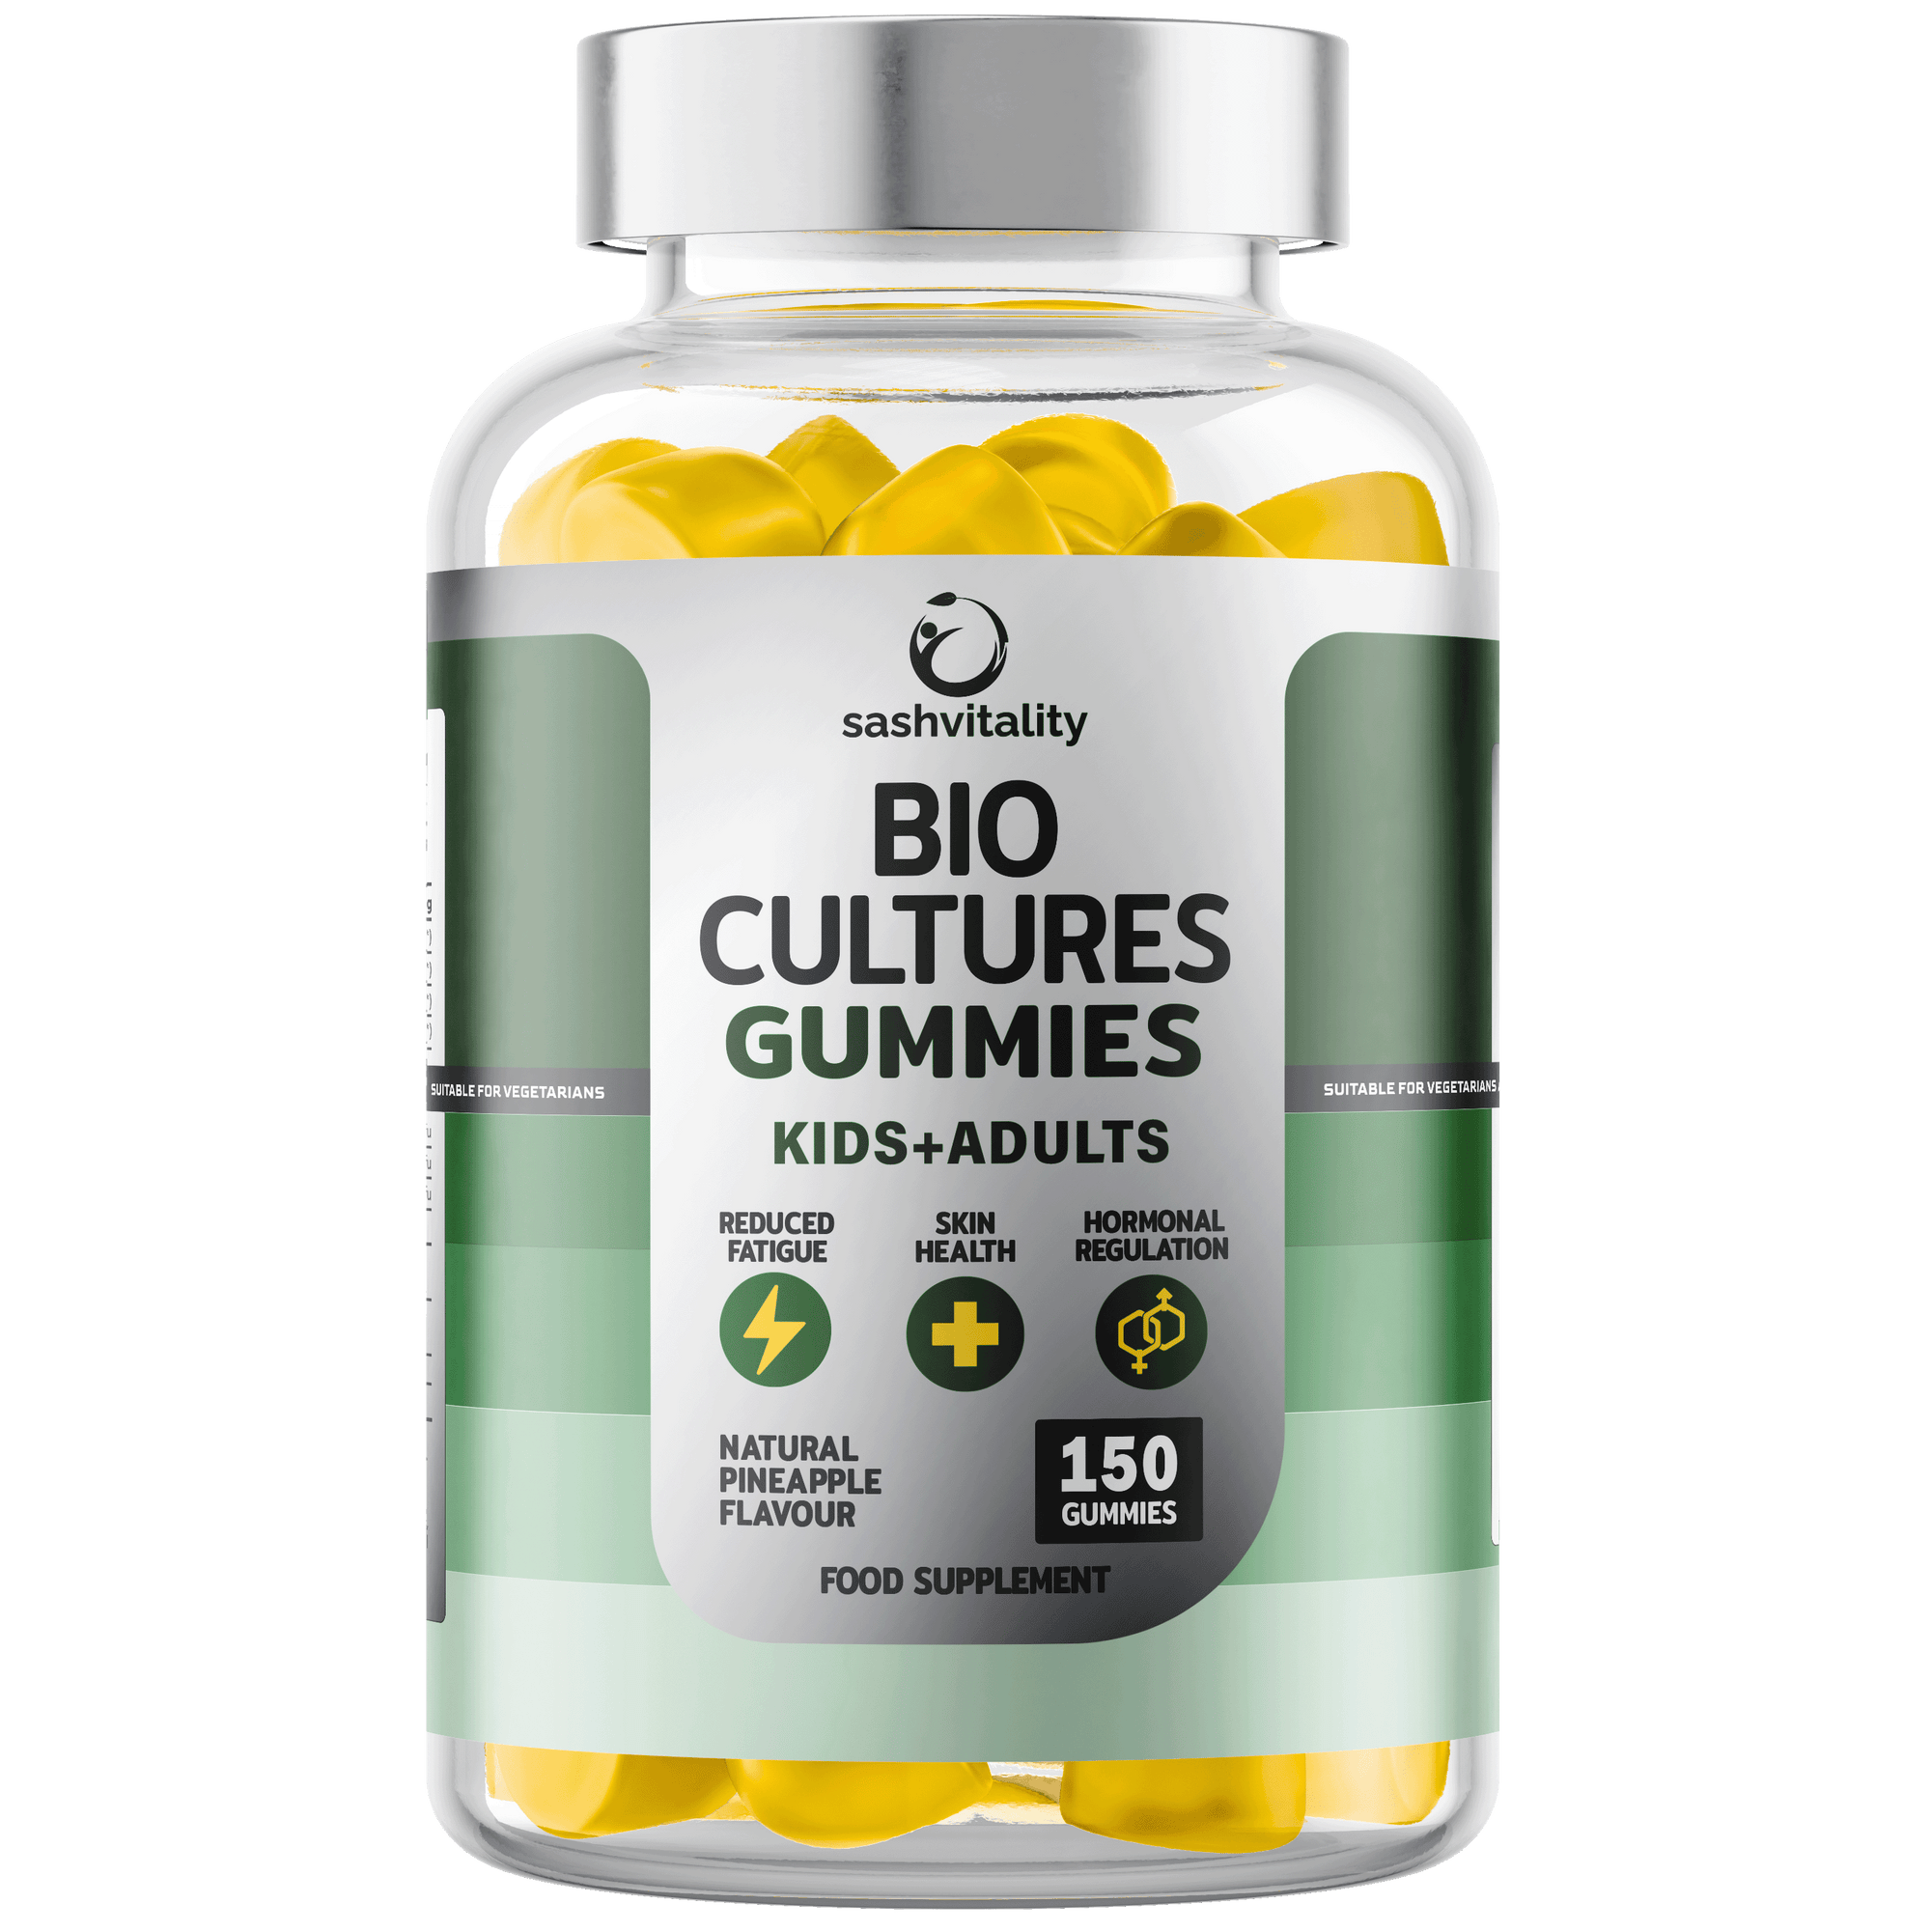 Probiotics Gummies for Adults and Kids - 150 Gummies - Vitamin C, B3, B5, B6 - UK Made Sash Vitality - Gut Health - Immune System Support - Digestive Support - Supports Oral Health - (Pineapple Flavour)